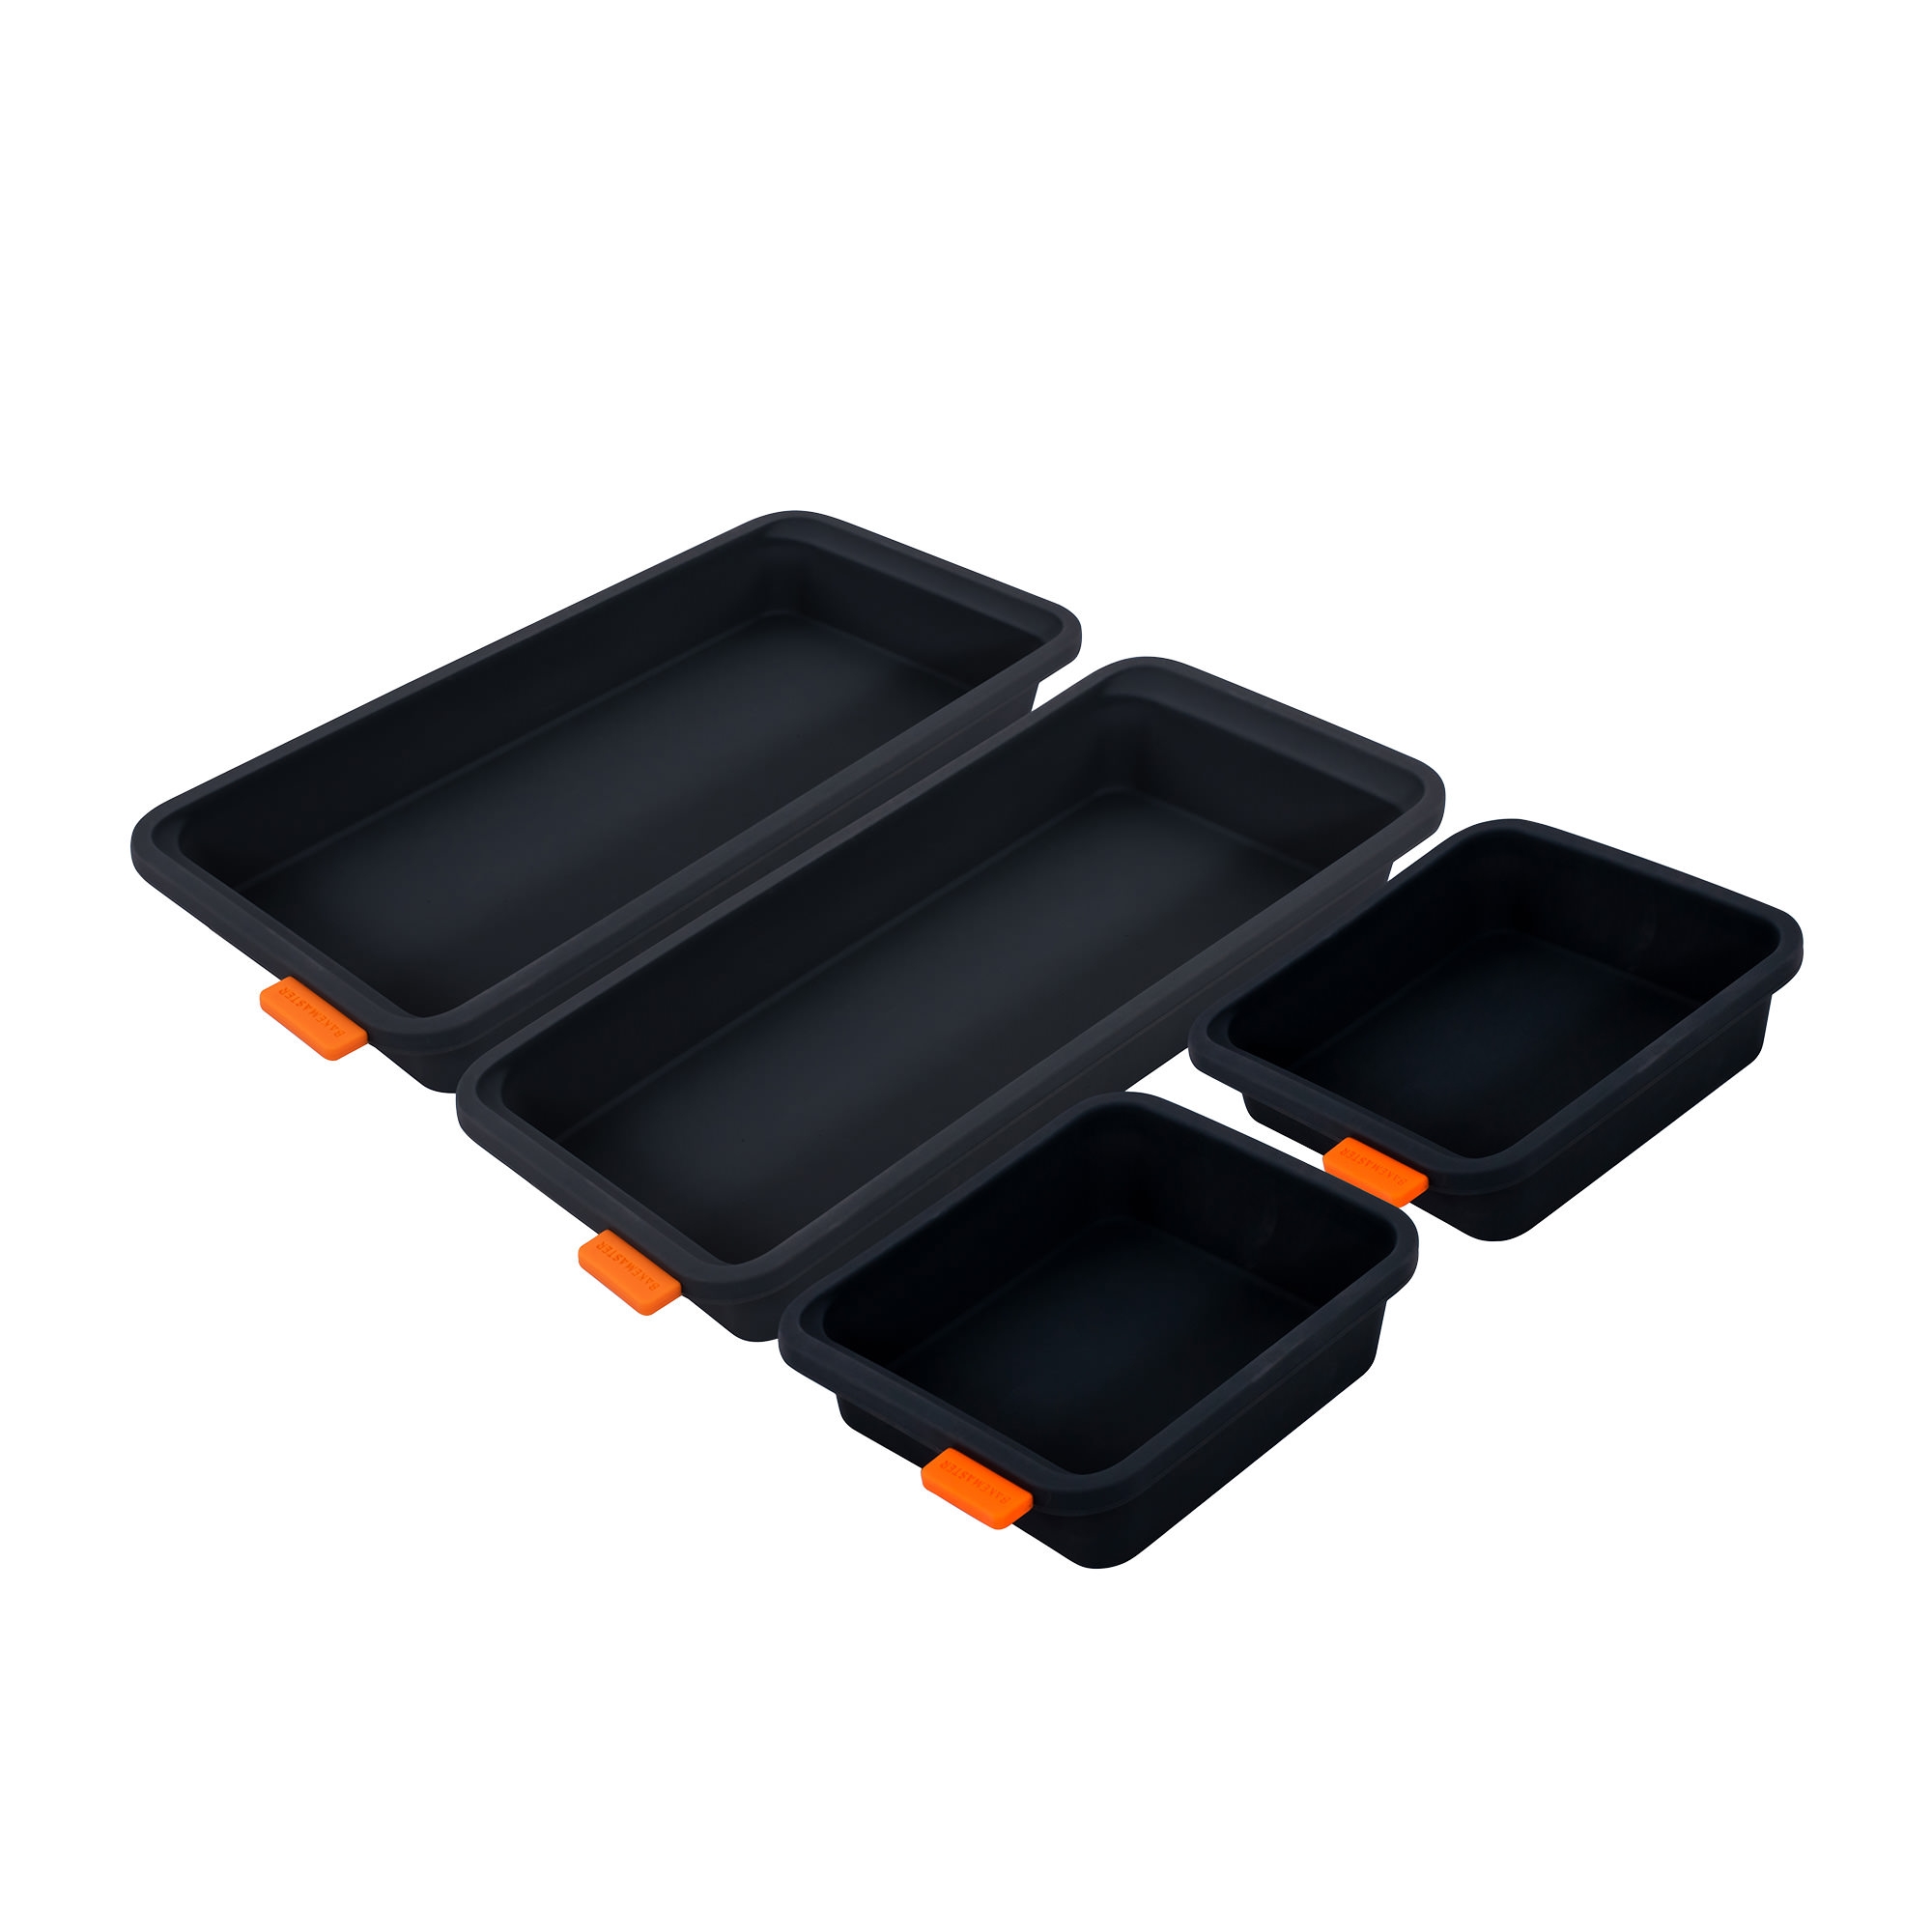 Bakemaster Reinforced Silicone Divider Trays Set 4pc Image 1